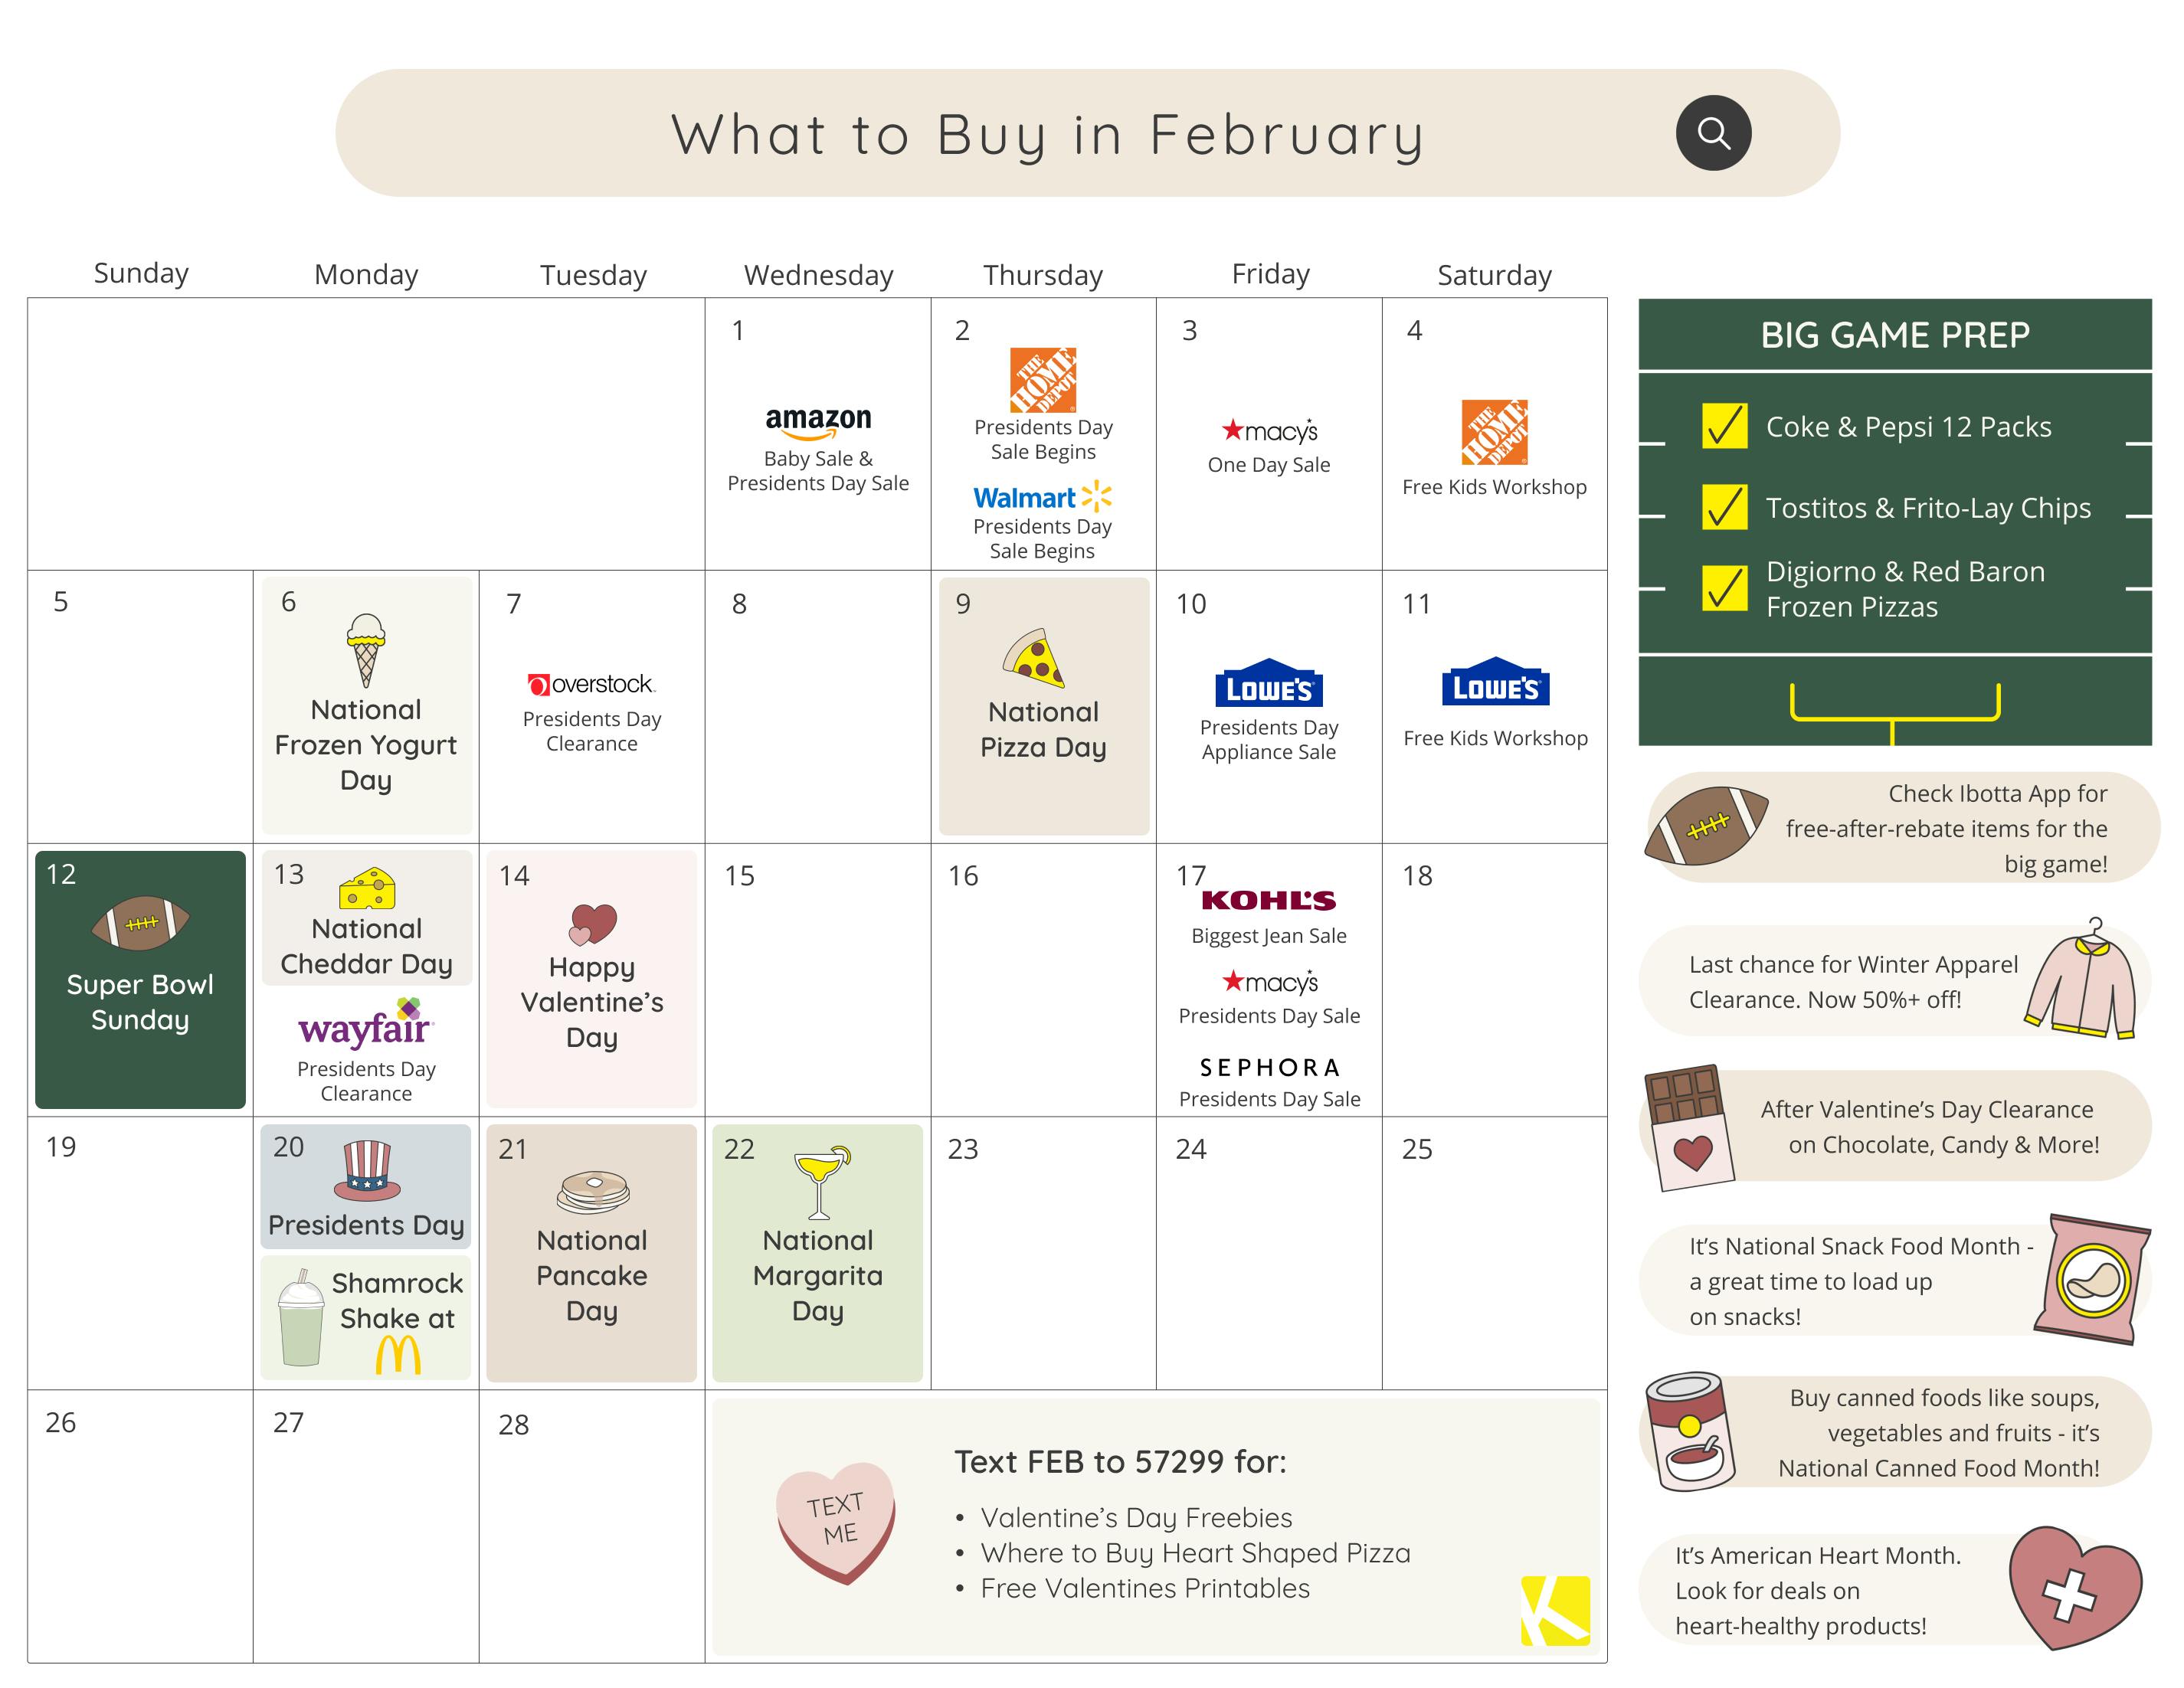 A calendar showing what to buy in February and when to buy it.